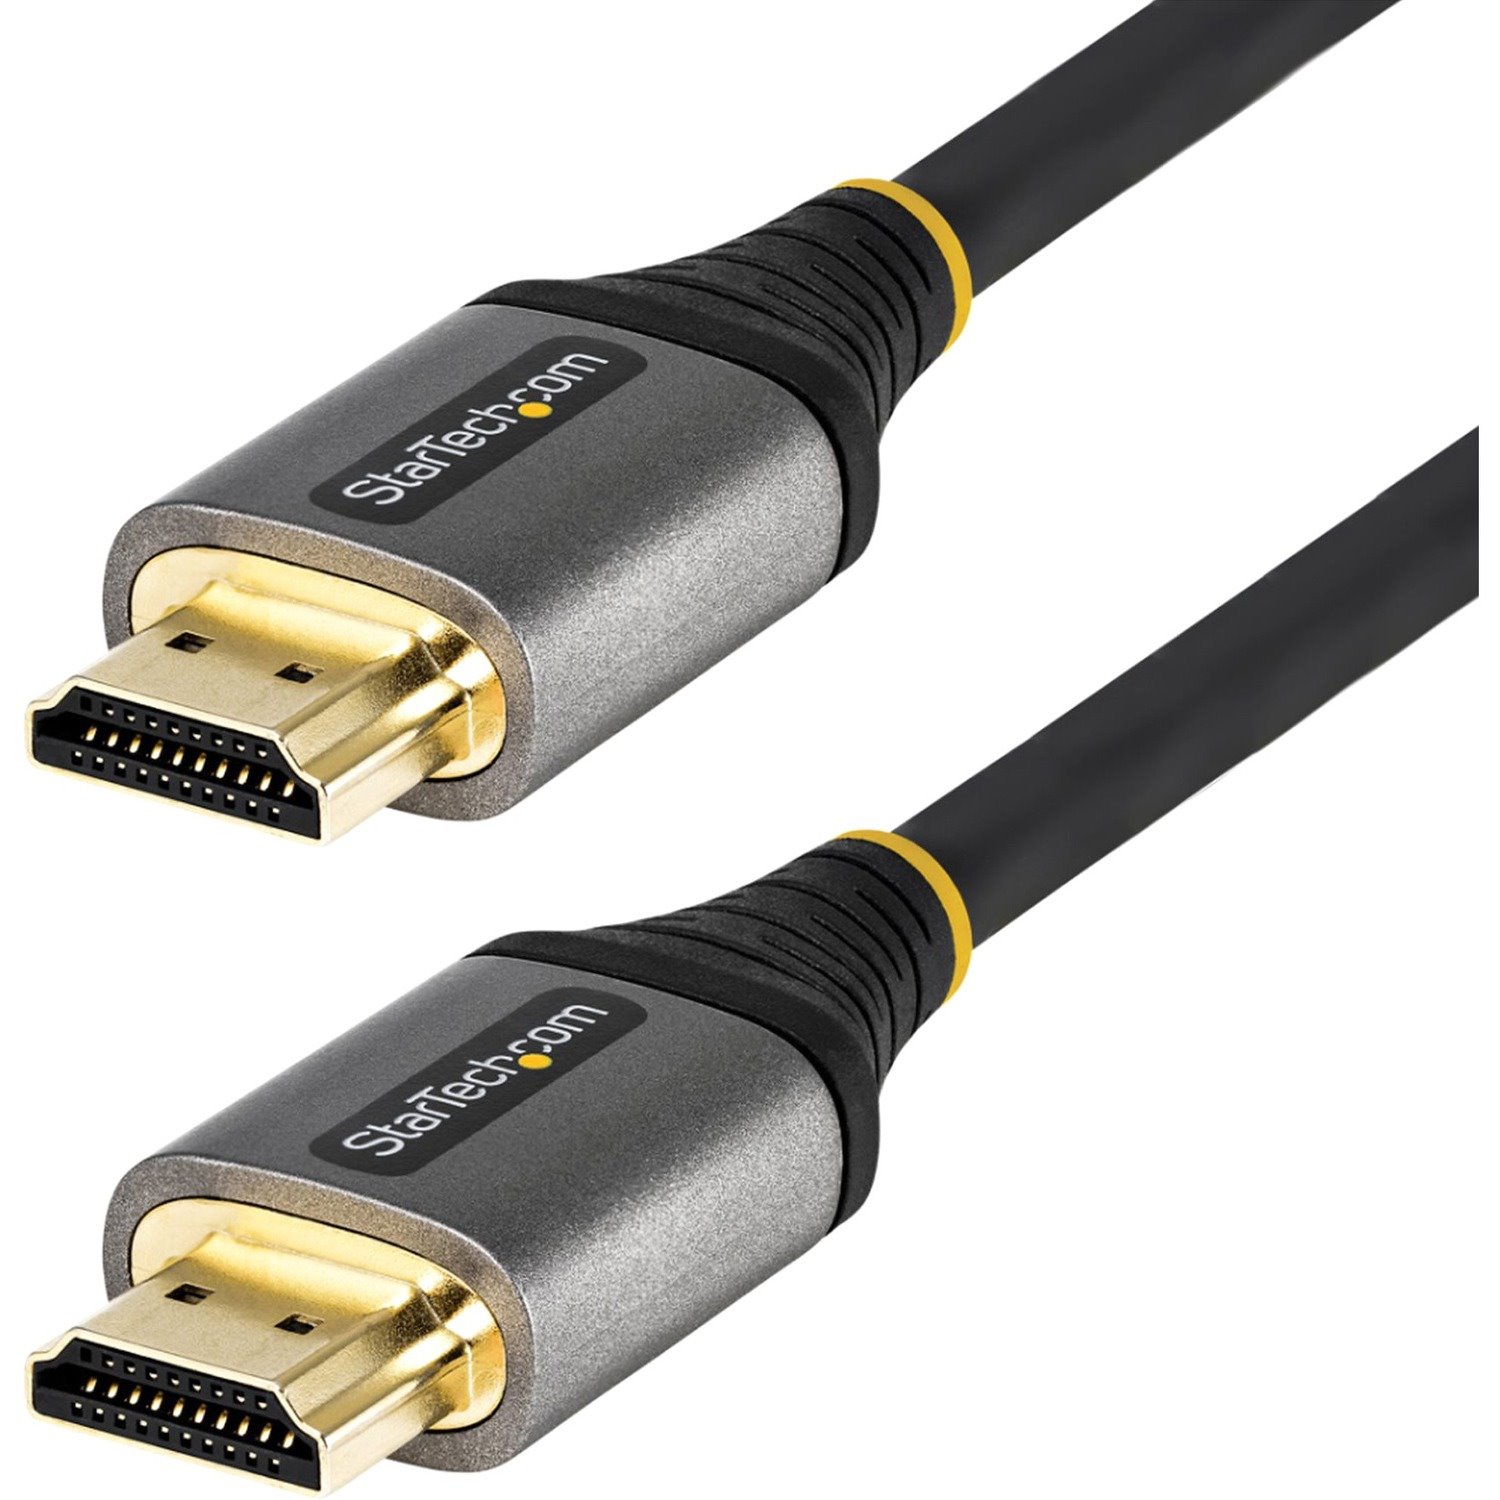 StarTech.com 3ft (1m) Premium Certified HDMI 2.0 Cable, High Speed Ultra HD 4K 60Hz HDMI Cable with Ethernet, HDR10, UHD HDMI Monitor Cord